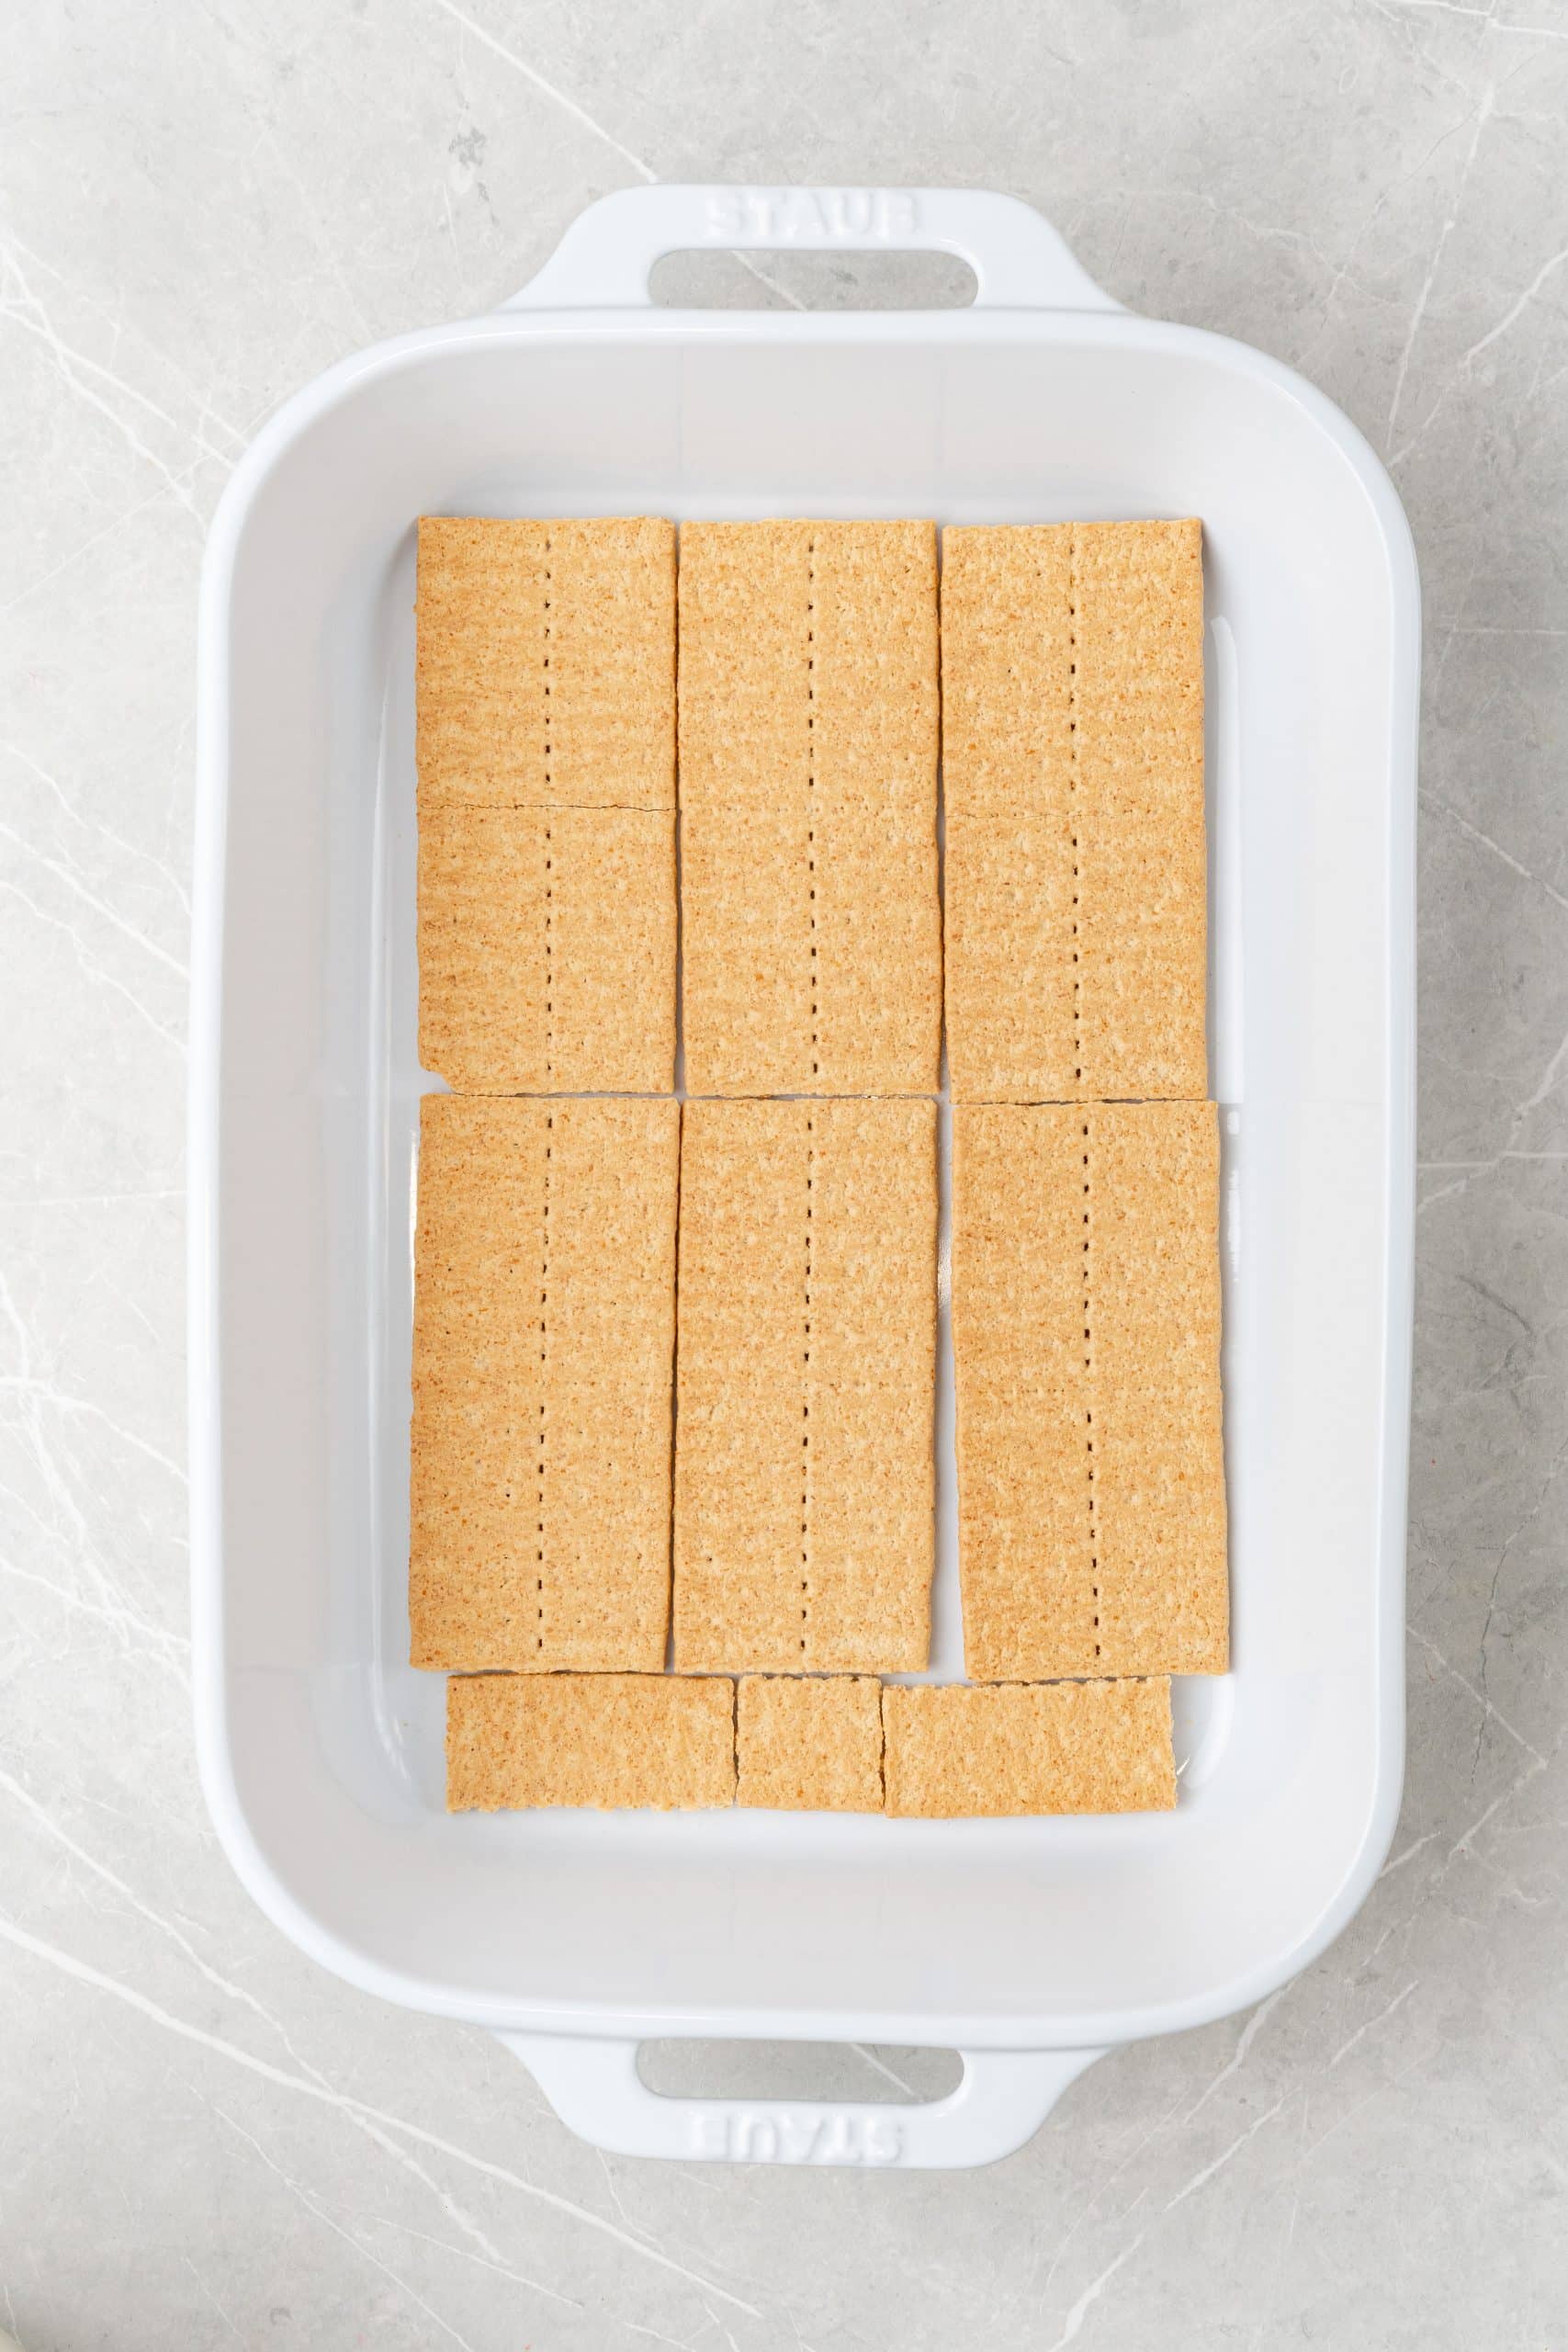 graham crackers lining the bottom of a white baking dish